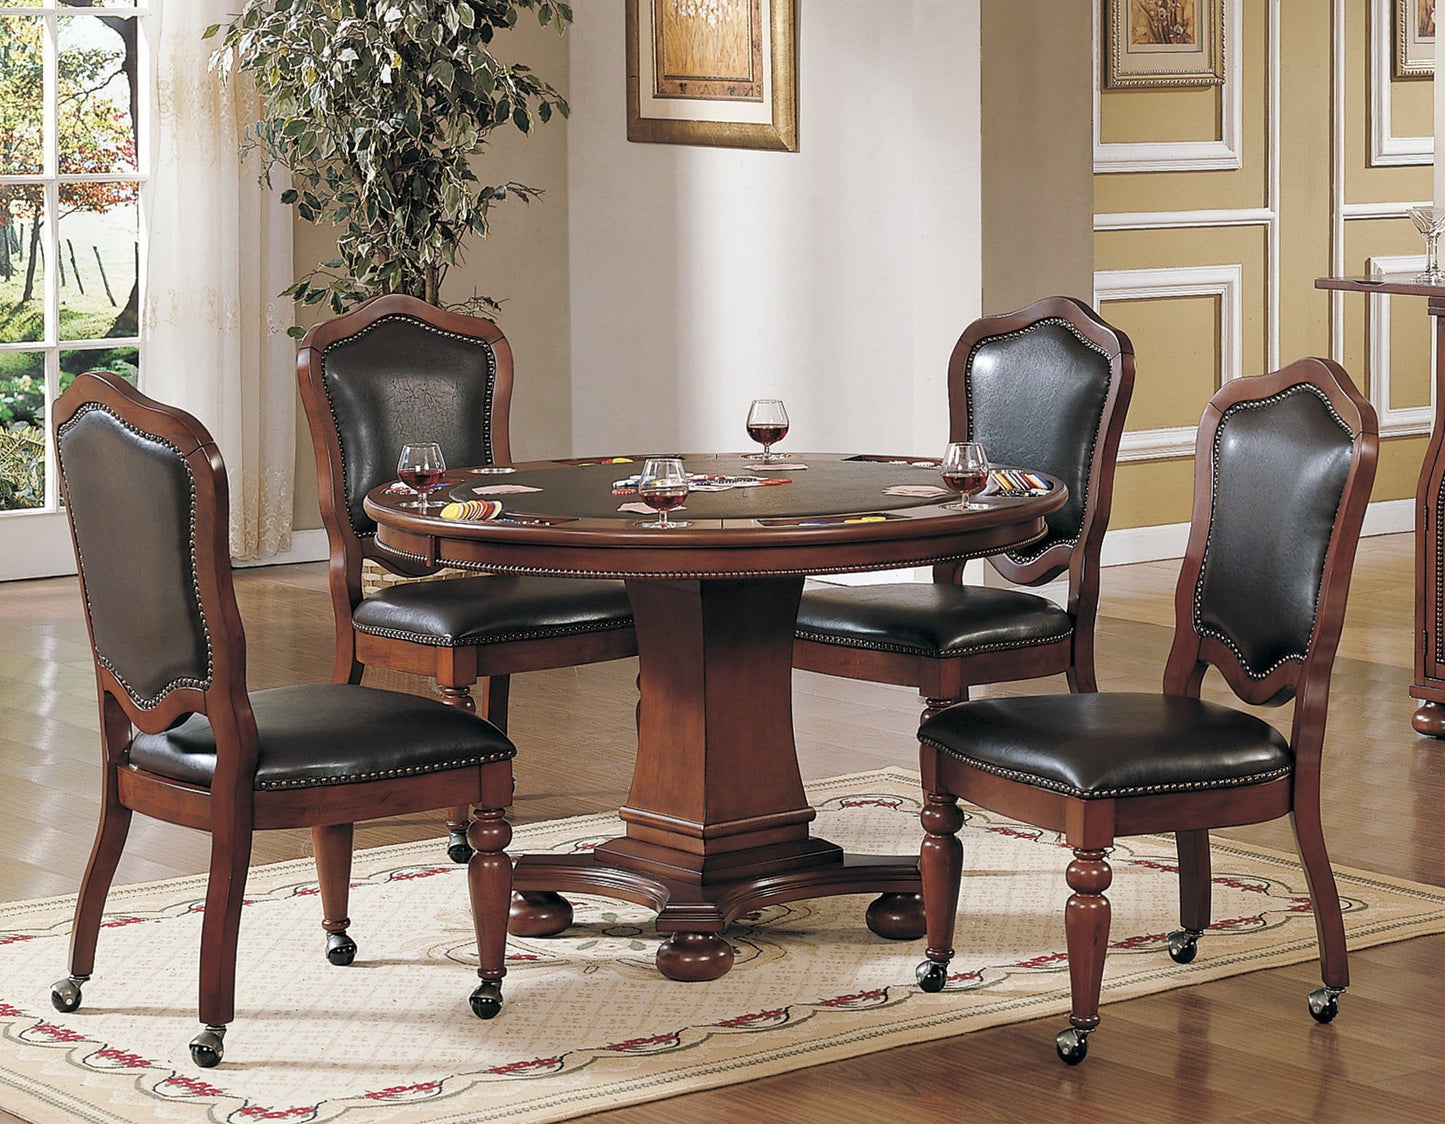 See here as a set of five, with four chairs and game table. These sold separatley